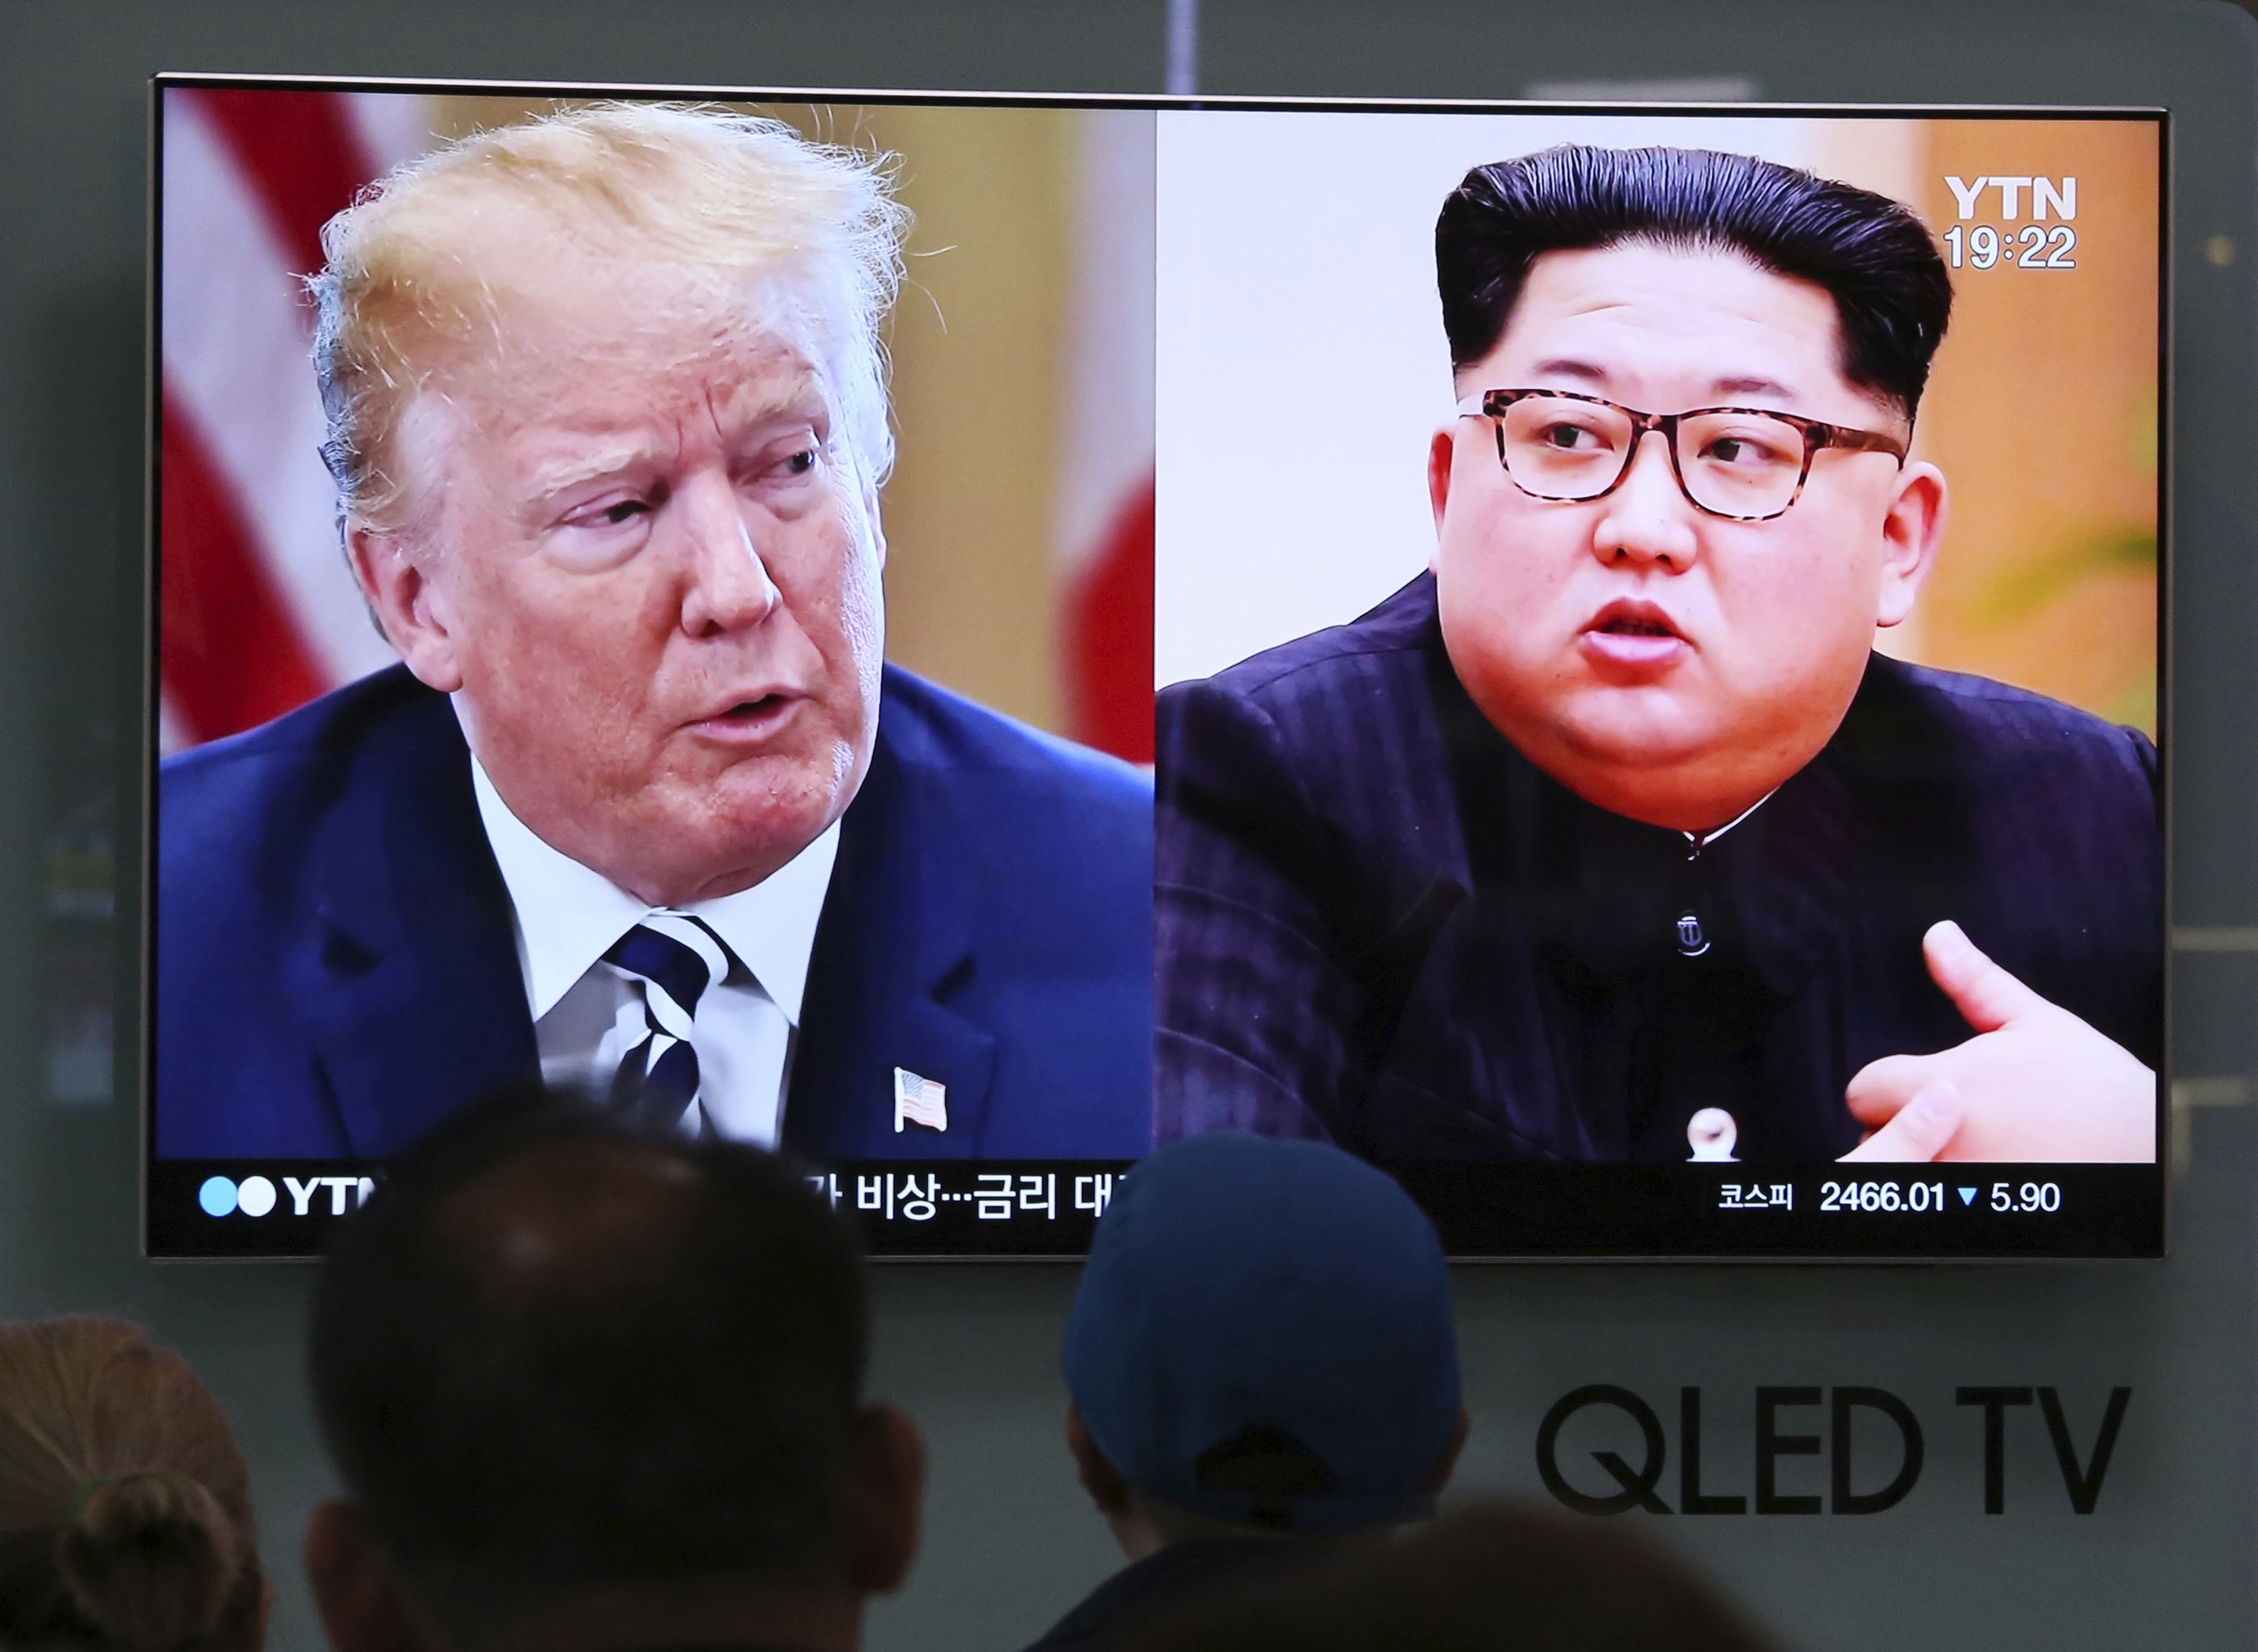 Trump plays down chances of quick breakthrough, DPRK official brings letter